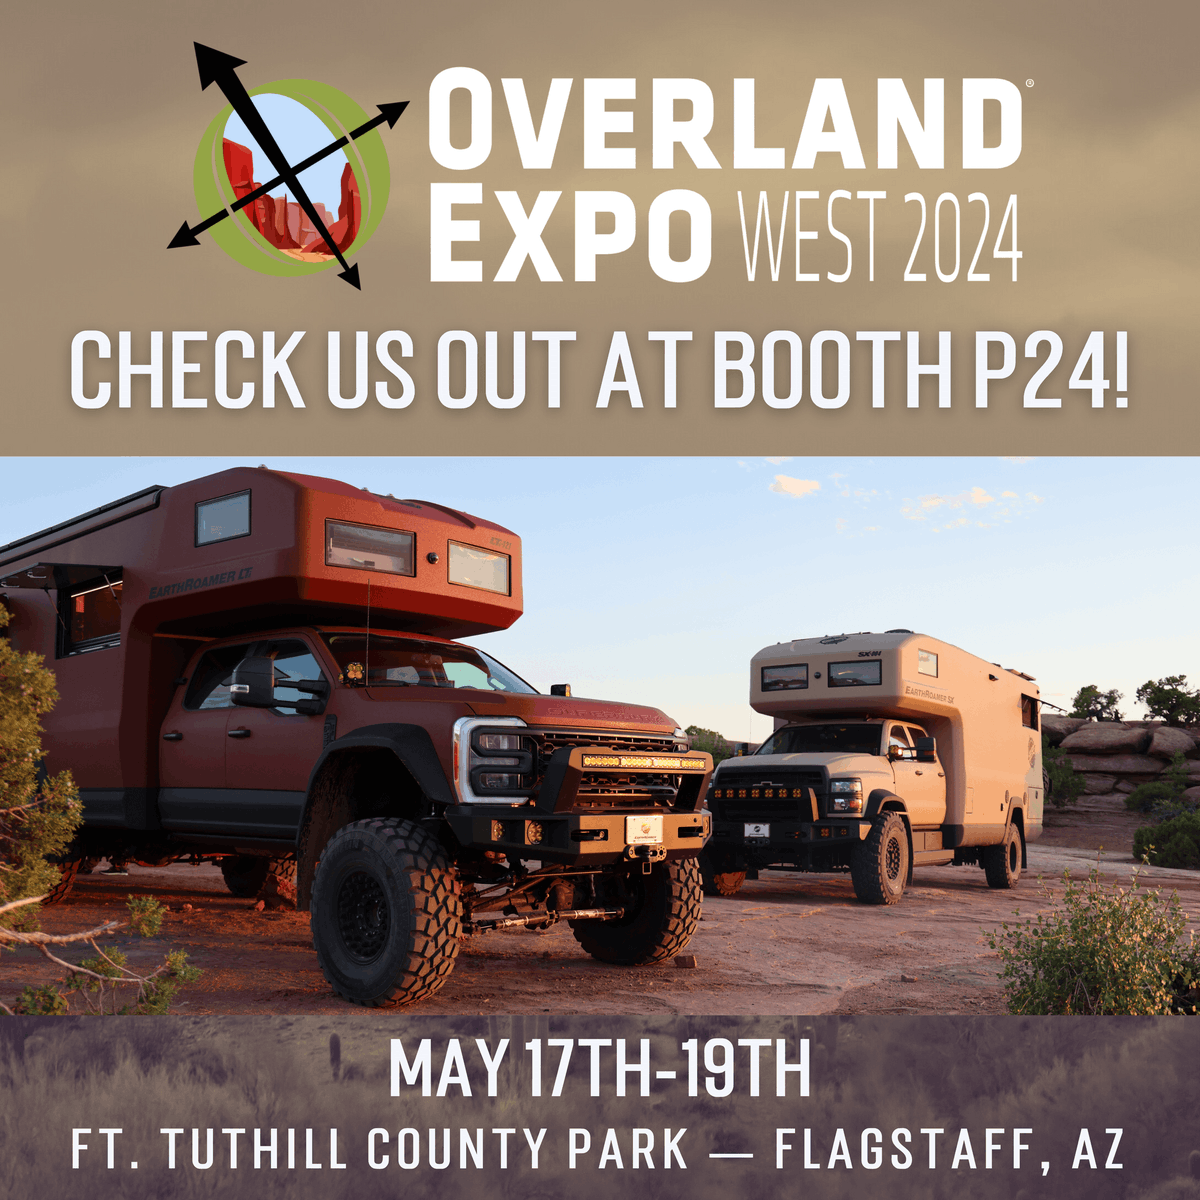 It's almost time for Overland Expo West 2024! You can find us in booth P24 — see you there 🤟 · · · #earthroamer #offroad4x4 #expeditionvehicle #campinglife #overlanding #4x4life #4x4trucks #vanlife #vanlifeadventures